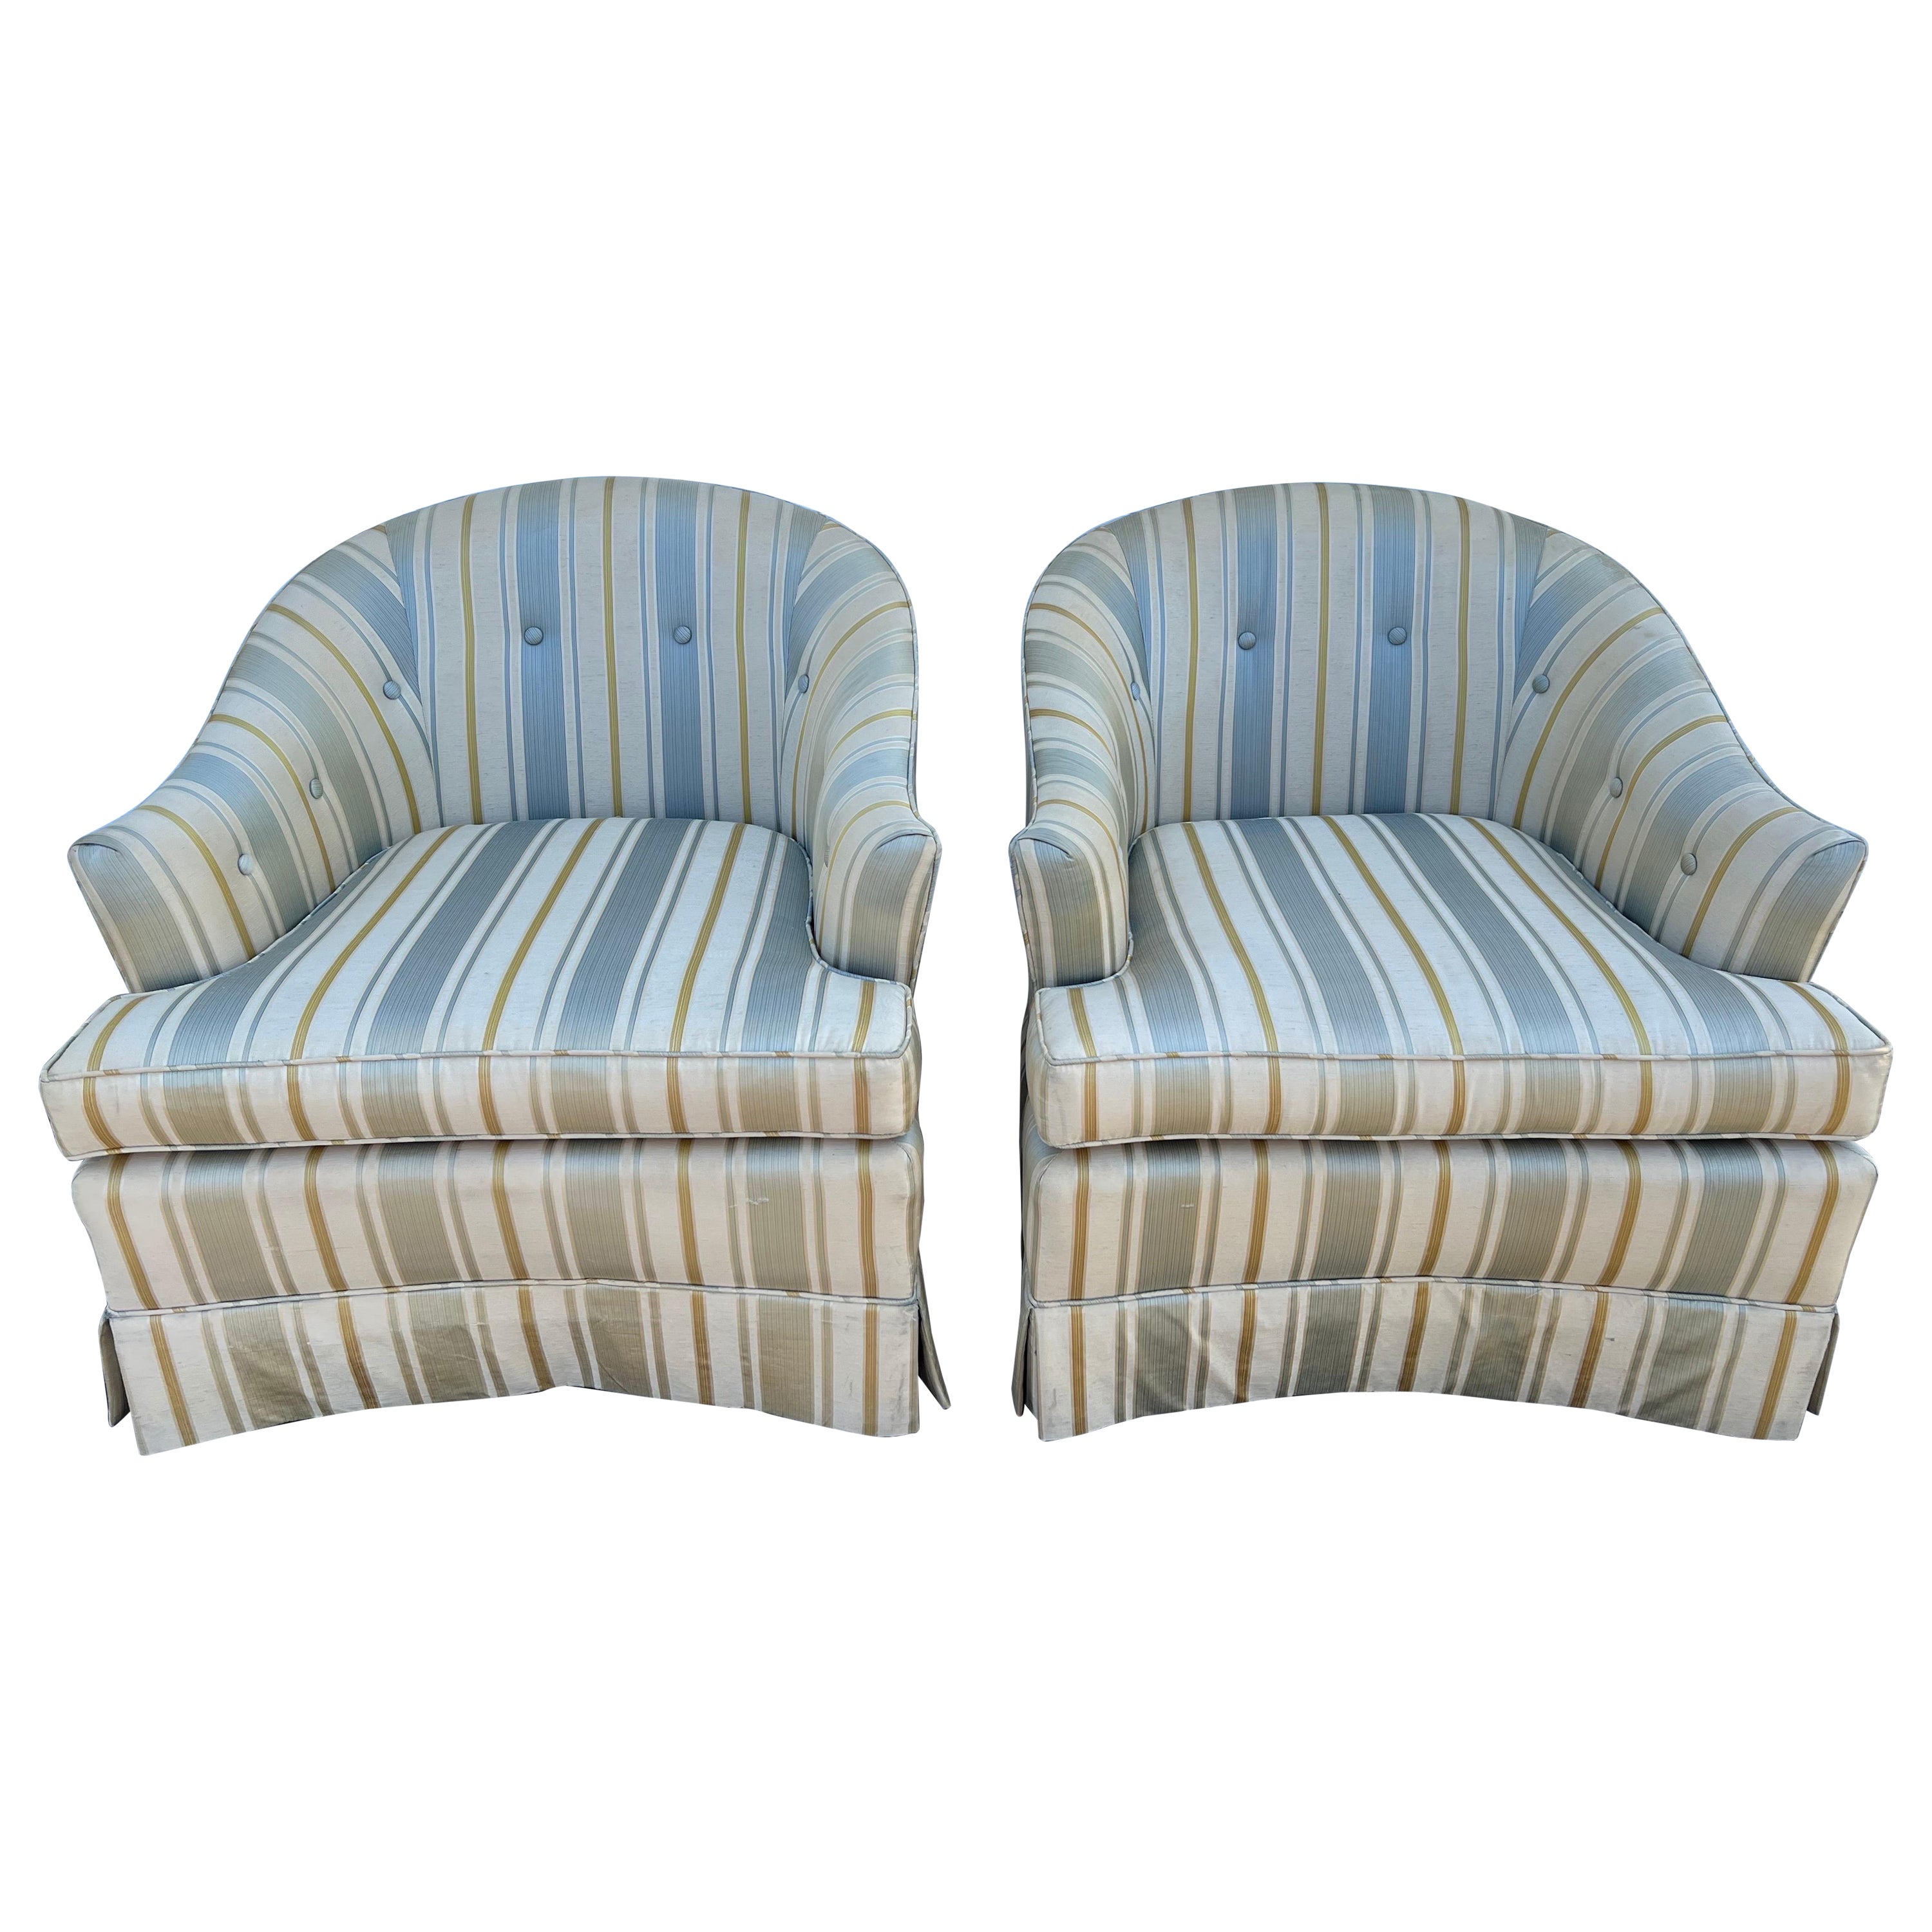 Pair of Silk Club Chairs by Drexel Heritage